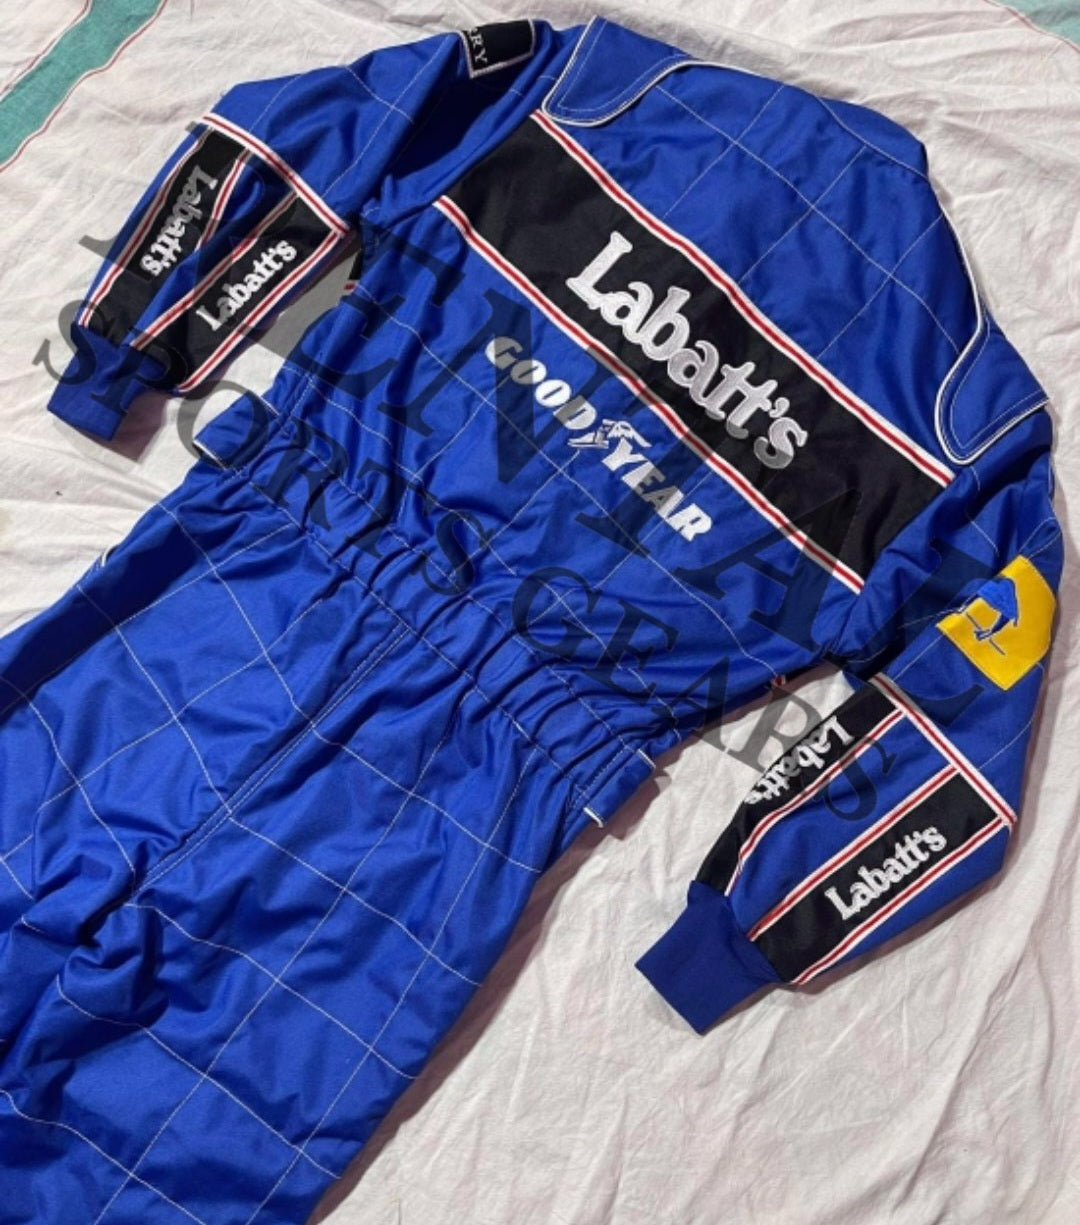 Nigel Mansell 1992 F1 Embroidery Race Suit |  F1 Replica Embroidery Race Suit